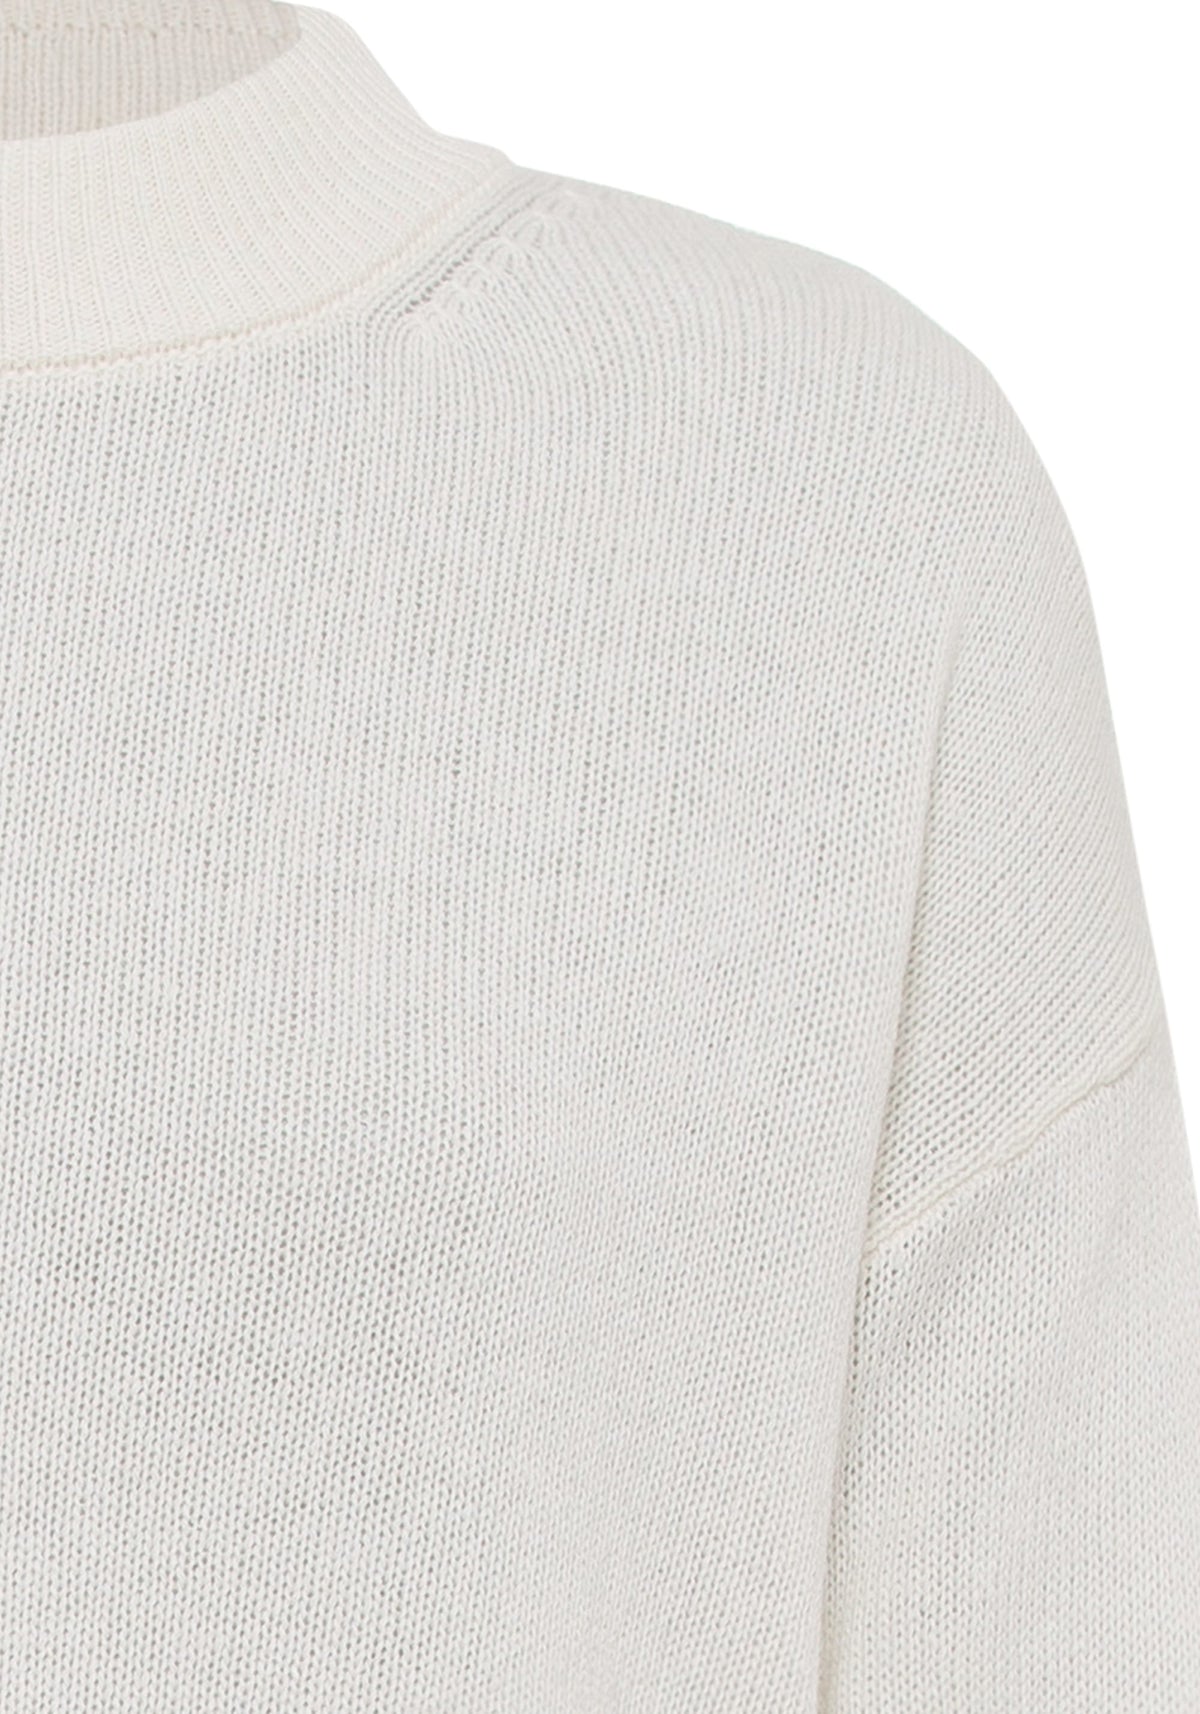 Cashmere Merino Long Sleeve Solid Mock Neck Sweater